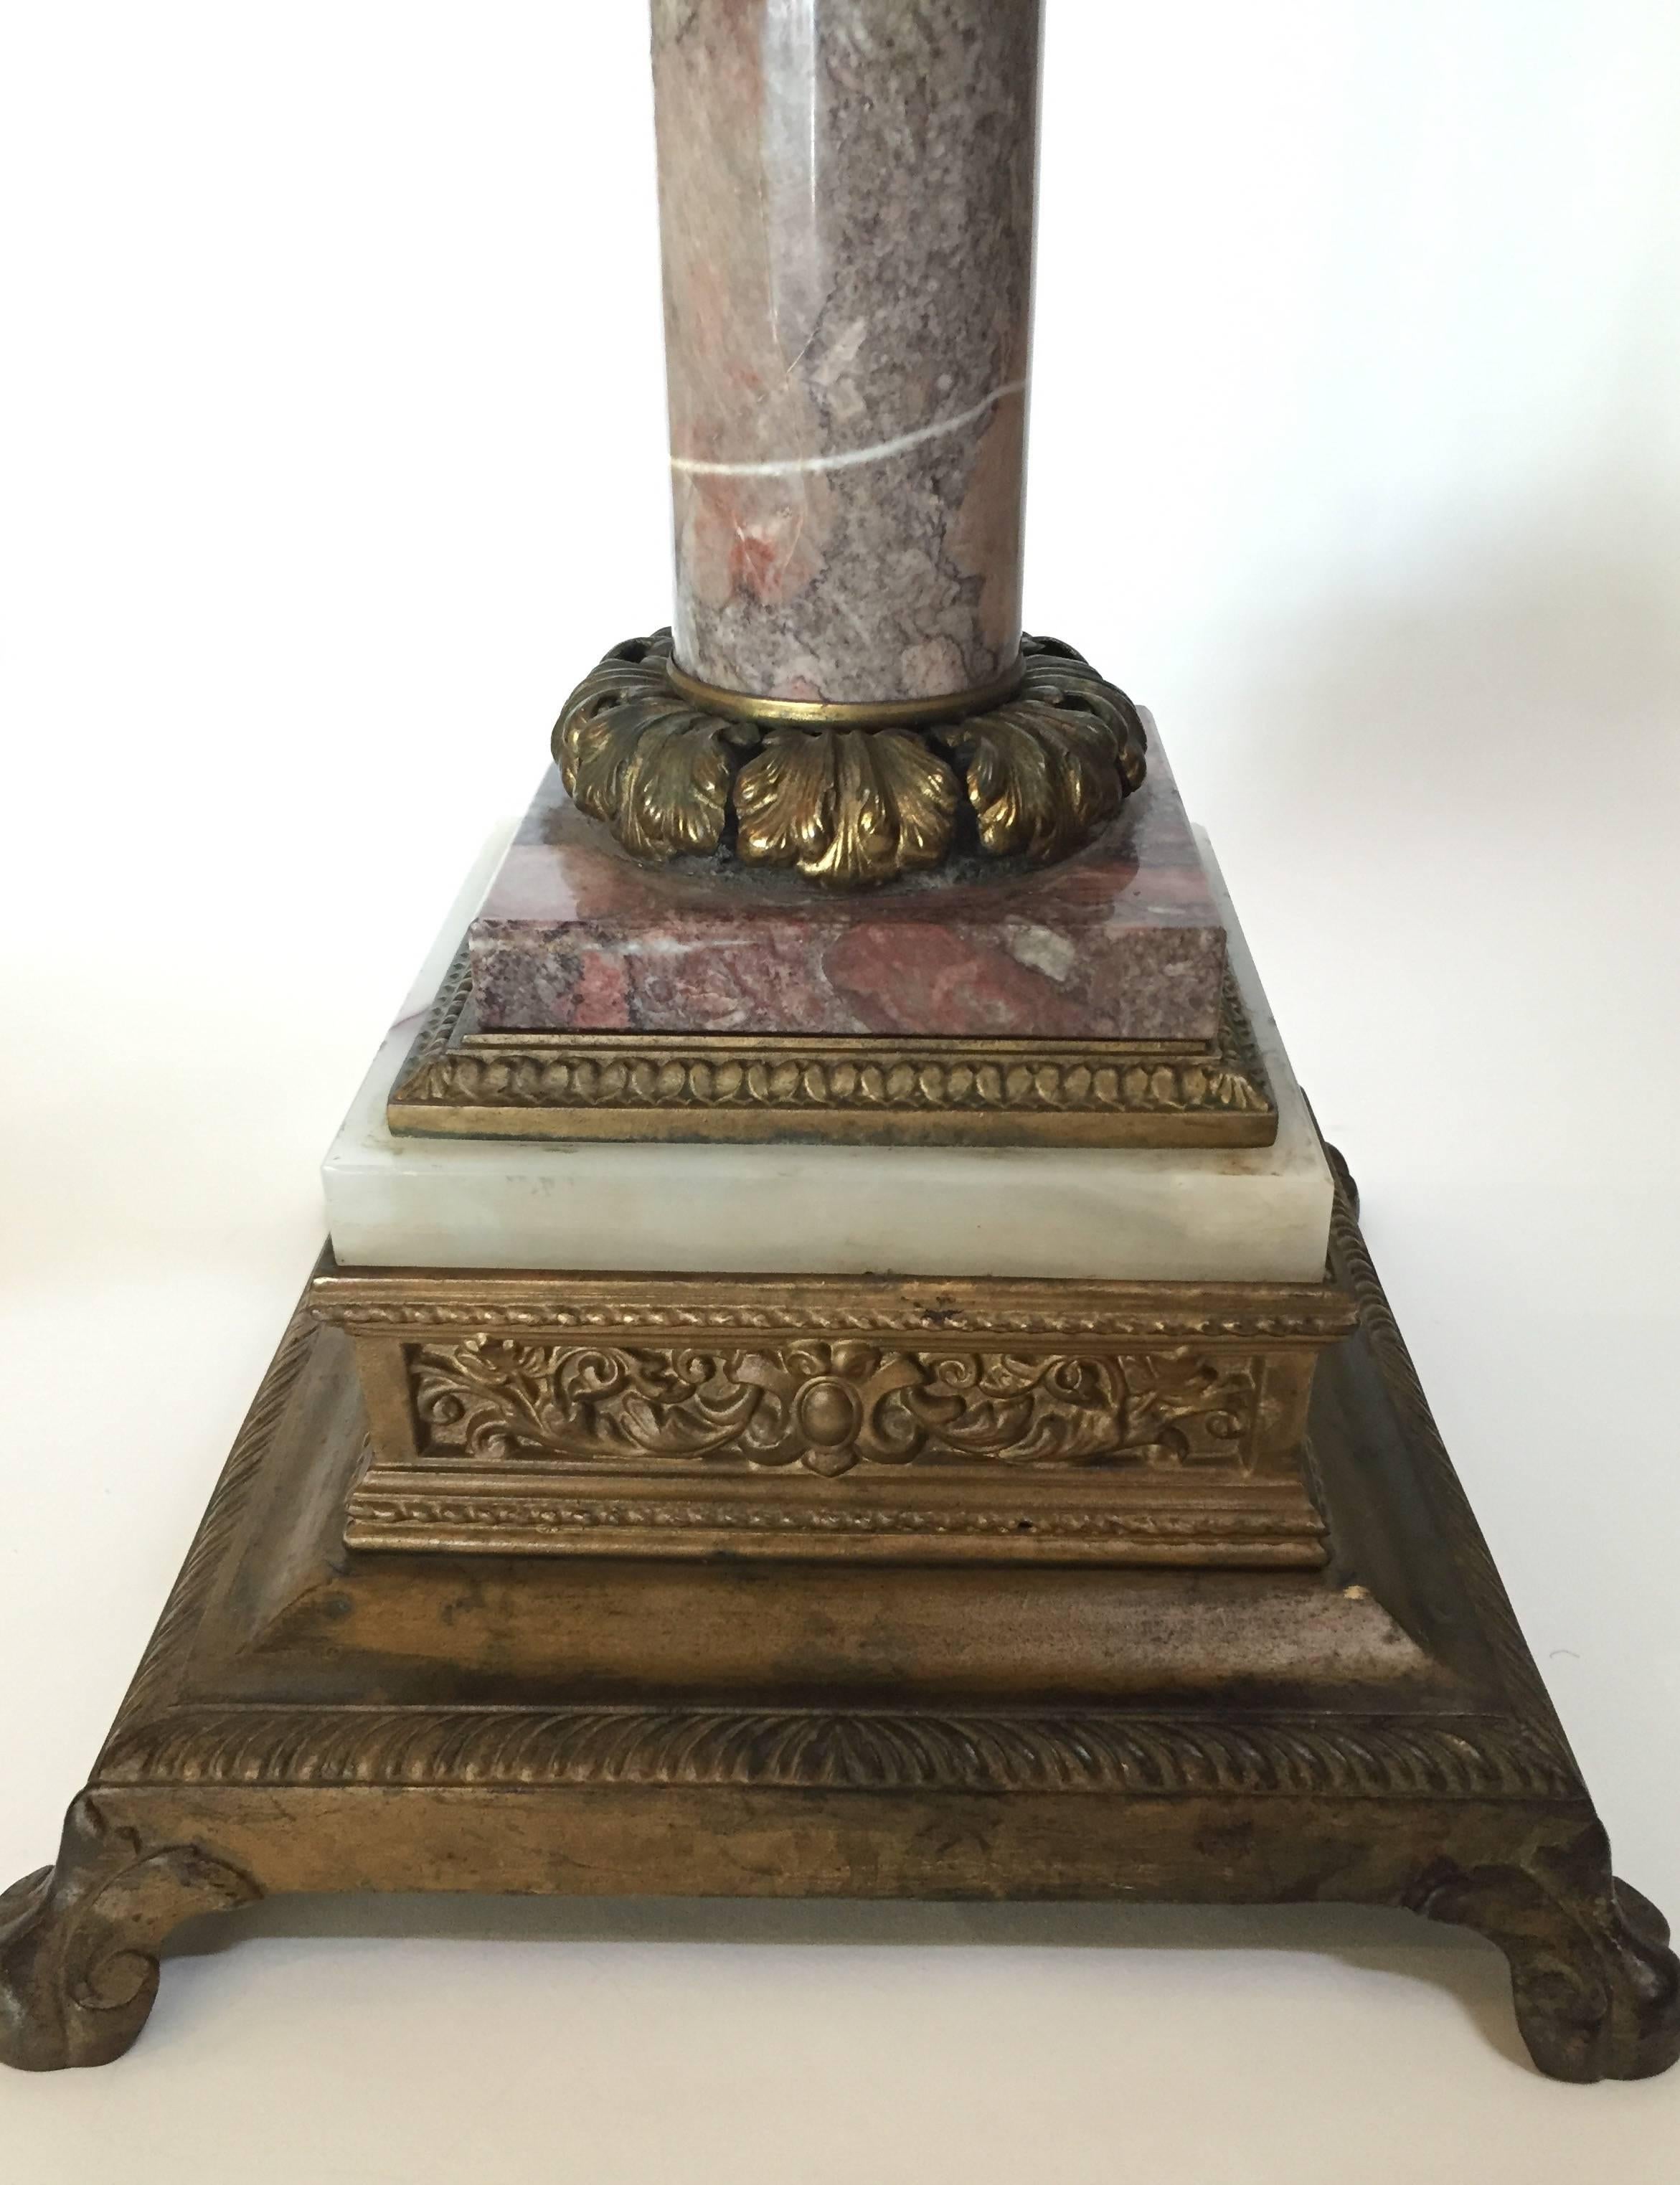 A lovely Renaissance style table or stand 19th century Italy, the very highly cast figures on the bronze section are fine and the use of several marble specimens rare, with gilt bronze mounts. This is a rare and unusual piece that you will find is